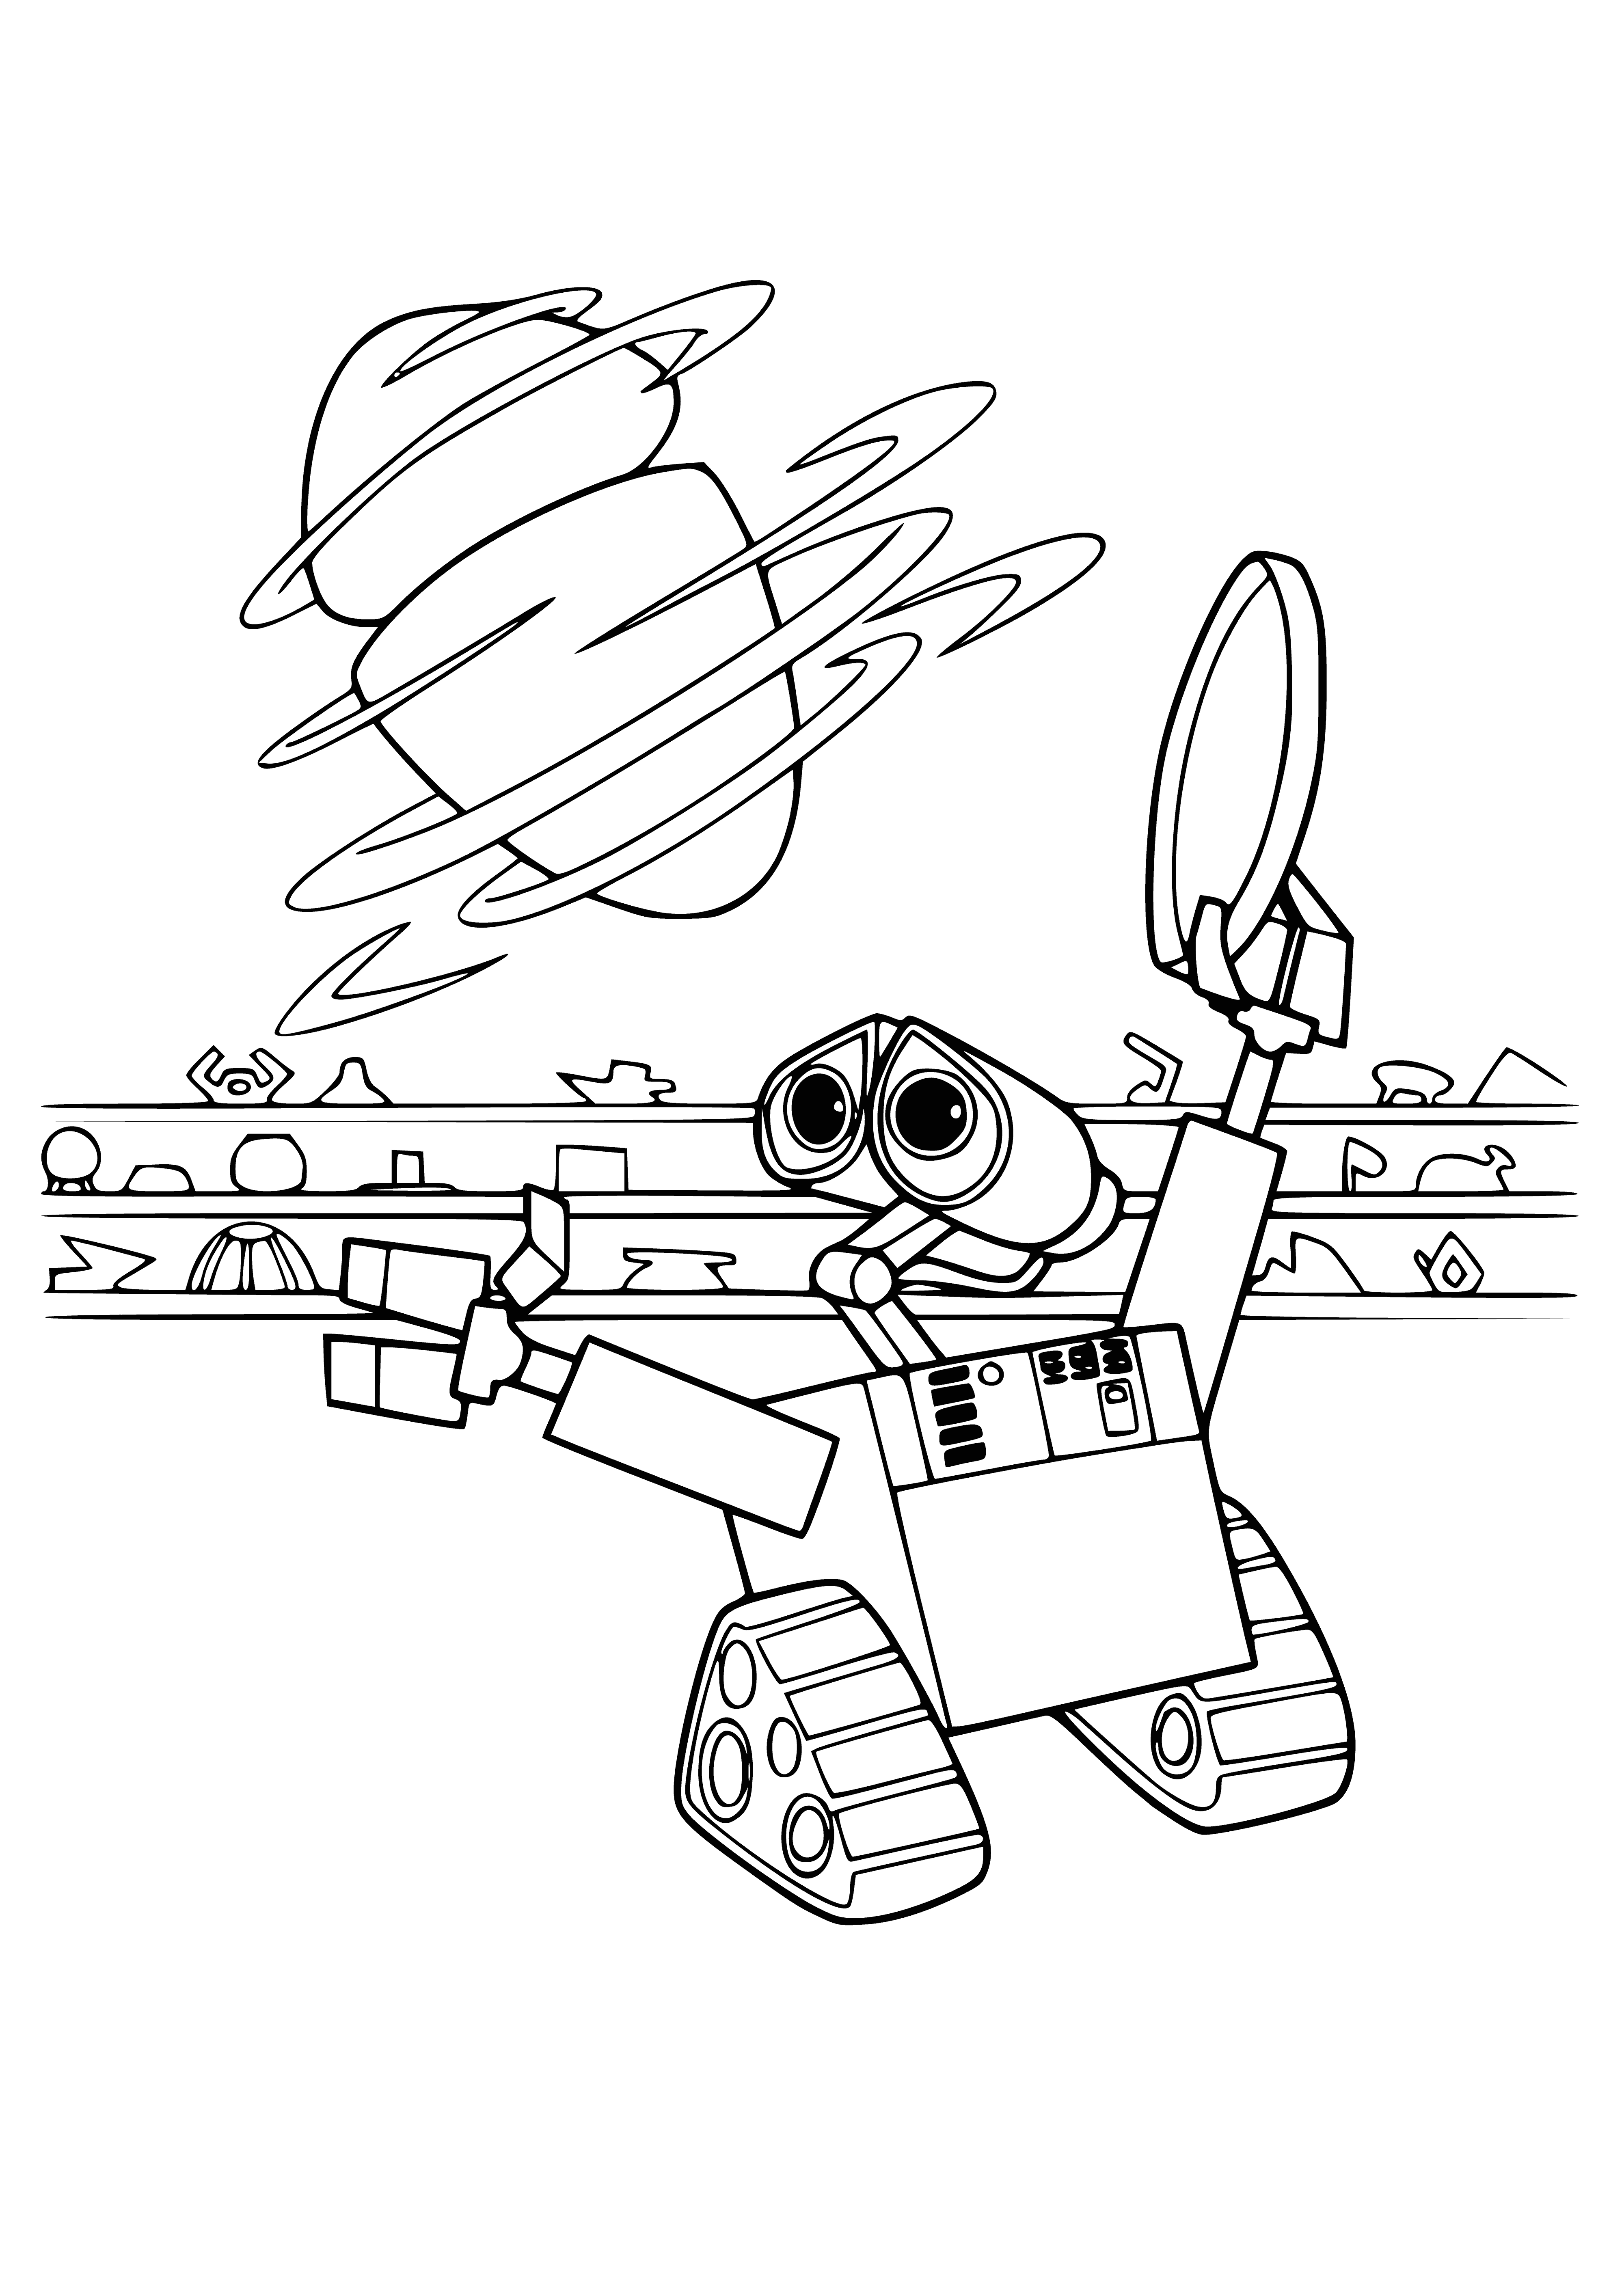 coloring page: Wall-E and Eve explore a lush green valley, surrounded by tall mountains, as Wall-E looks up at the glowing Eve. #Pixar #WallE #Robots